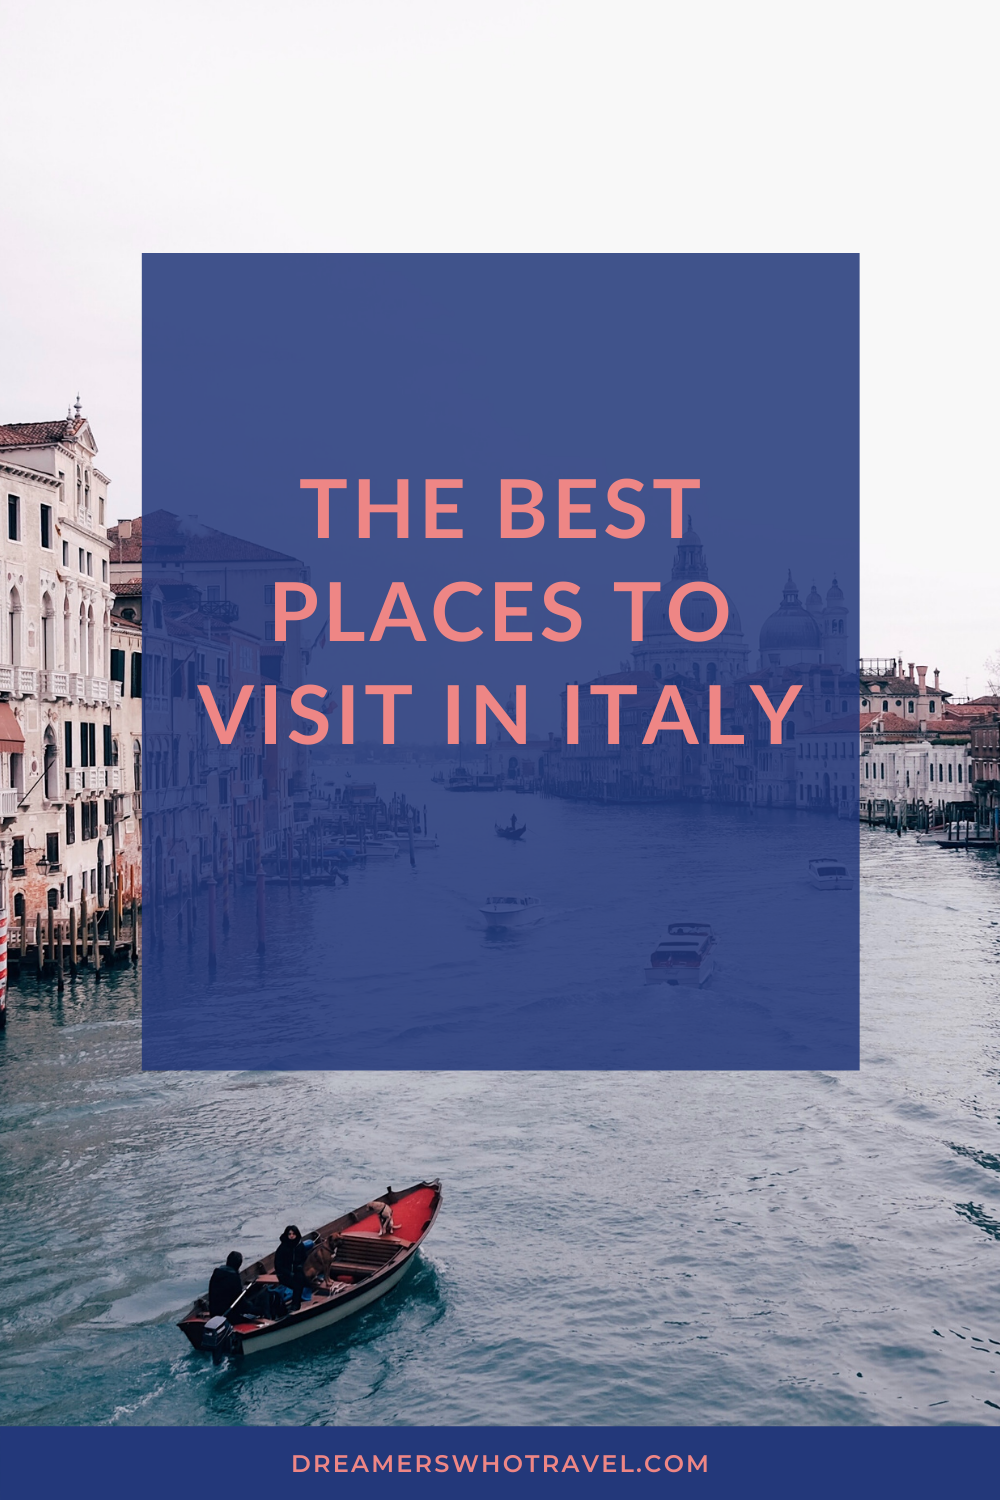 THE BEST PLACES TO VISIT IN ITALY